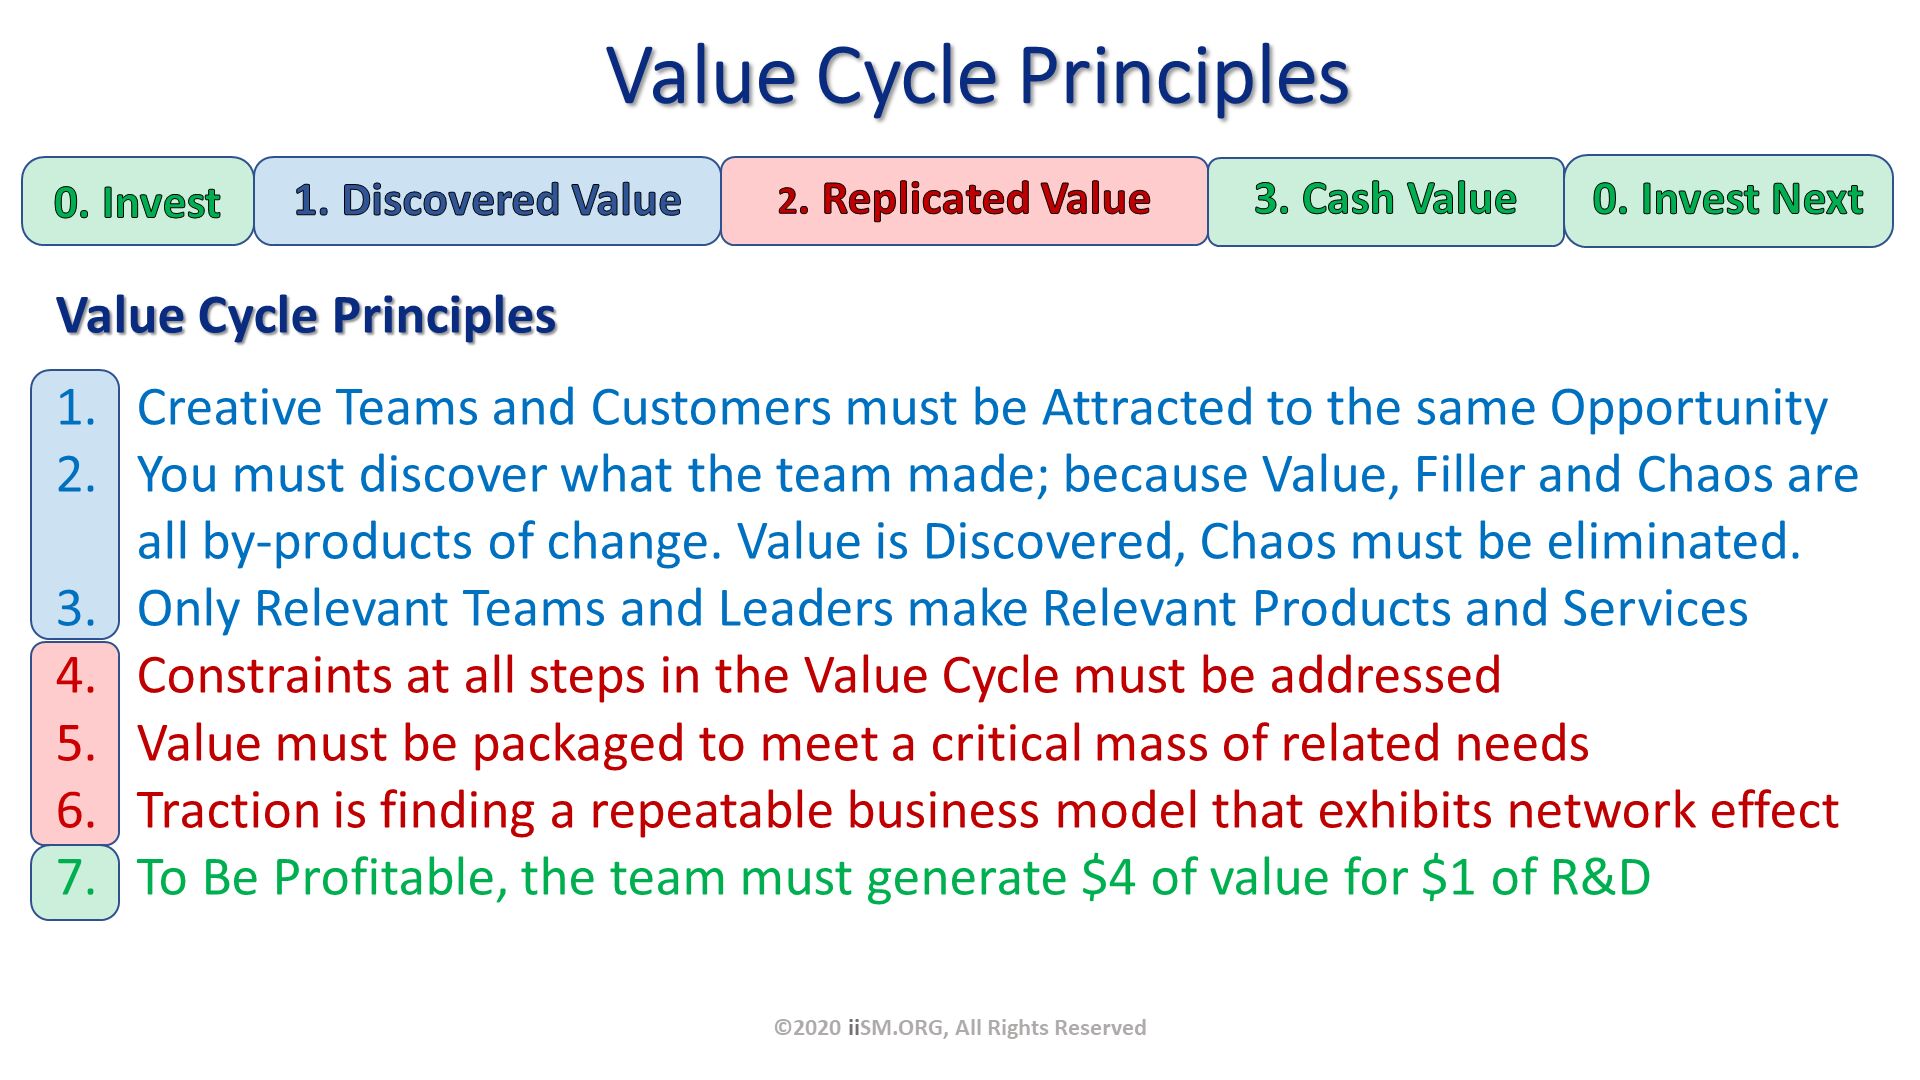 Value Cycle Principles. Value Cycle Principles
Creative Teams and Customers must be Attracted to the same Opportunity
You must discover what the team made; because Value, Filler and Chaos are all by-products of change. Value is Discovered, Chaos must be eliminated.
Only Relevant Teams and Leaders make Relevant Products and Services
Constraints at all steps in the Value Cycle must be addressed
Value must be packaged to meet a critical mass of related needs
Traction is finding a repeatable business model that exhibits network effect
To Be Profitable, the team must generate $4 of value for $1 of R&D. ©2020 iiSM.ORG, All Rights Reserved. 